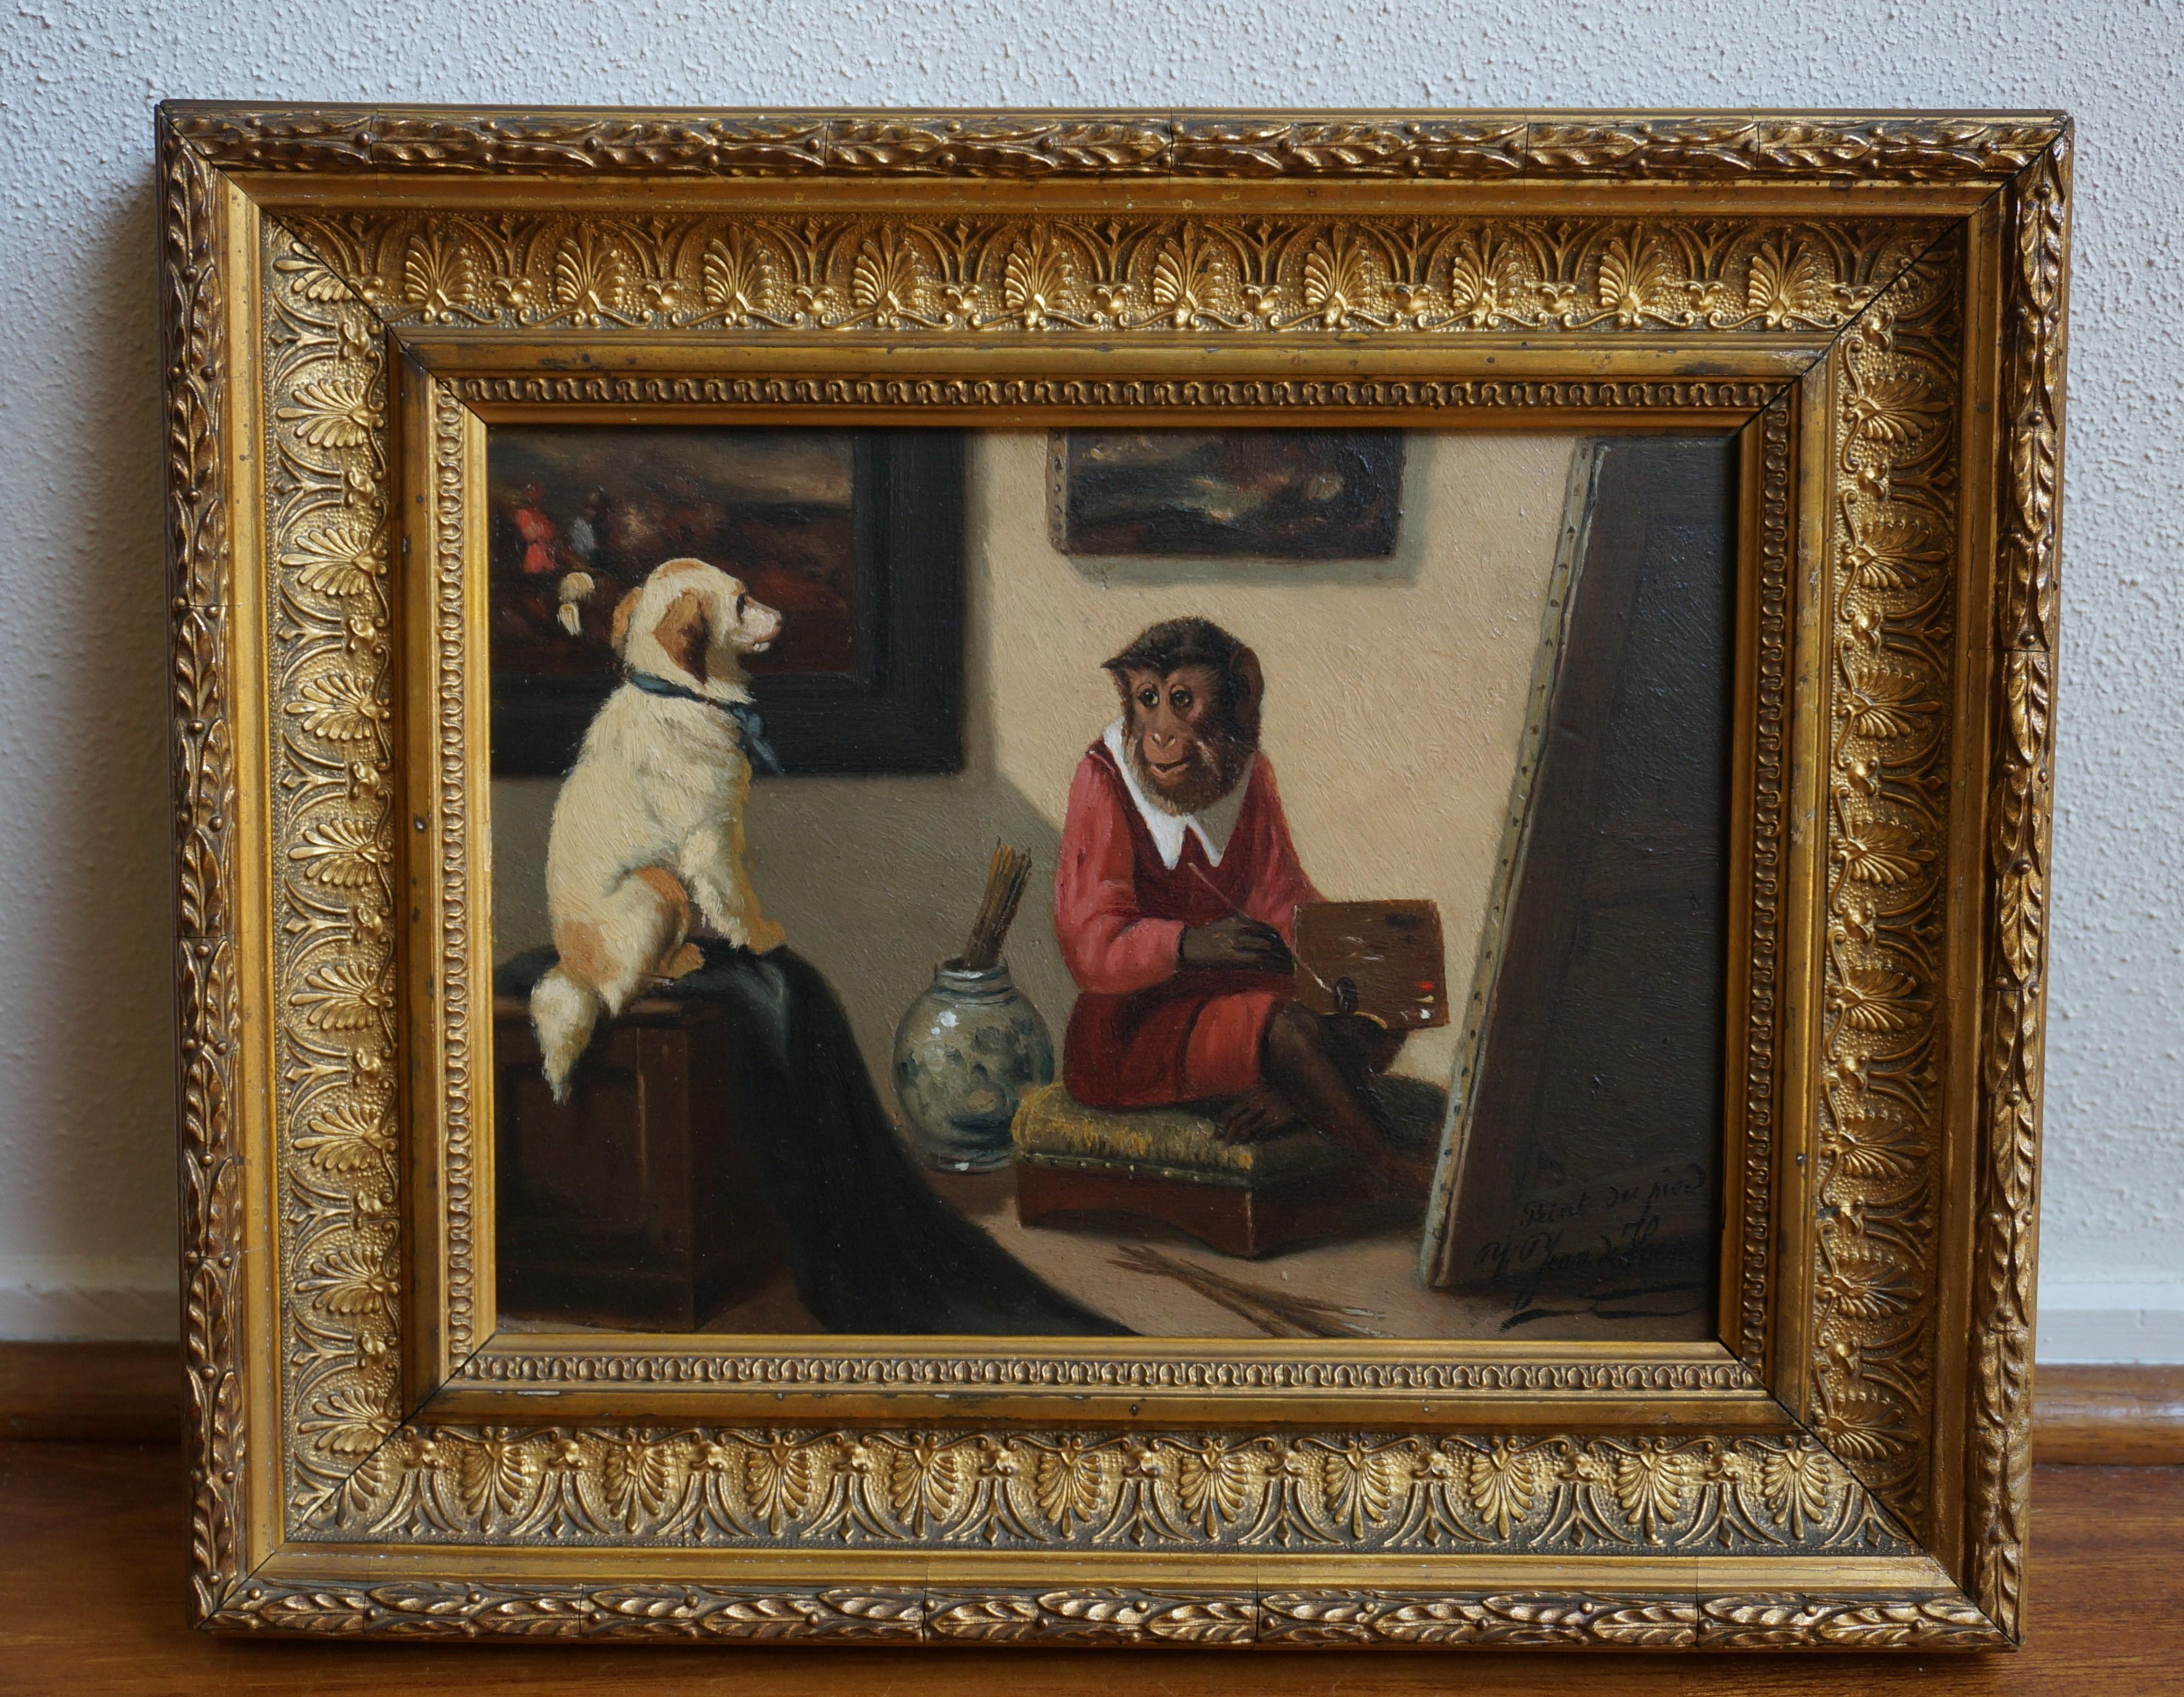  Singerie, Monkey painting a dog, ca. 1900, oil painting, painted with foot 7